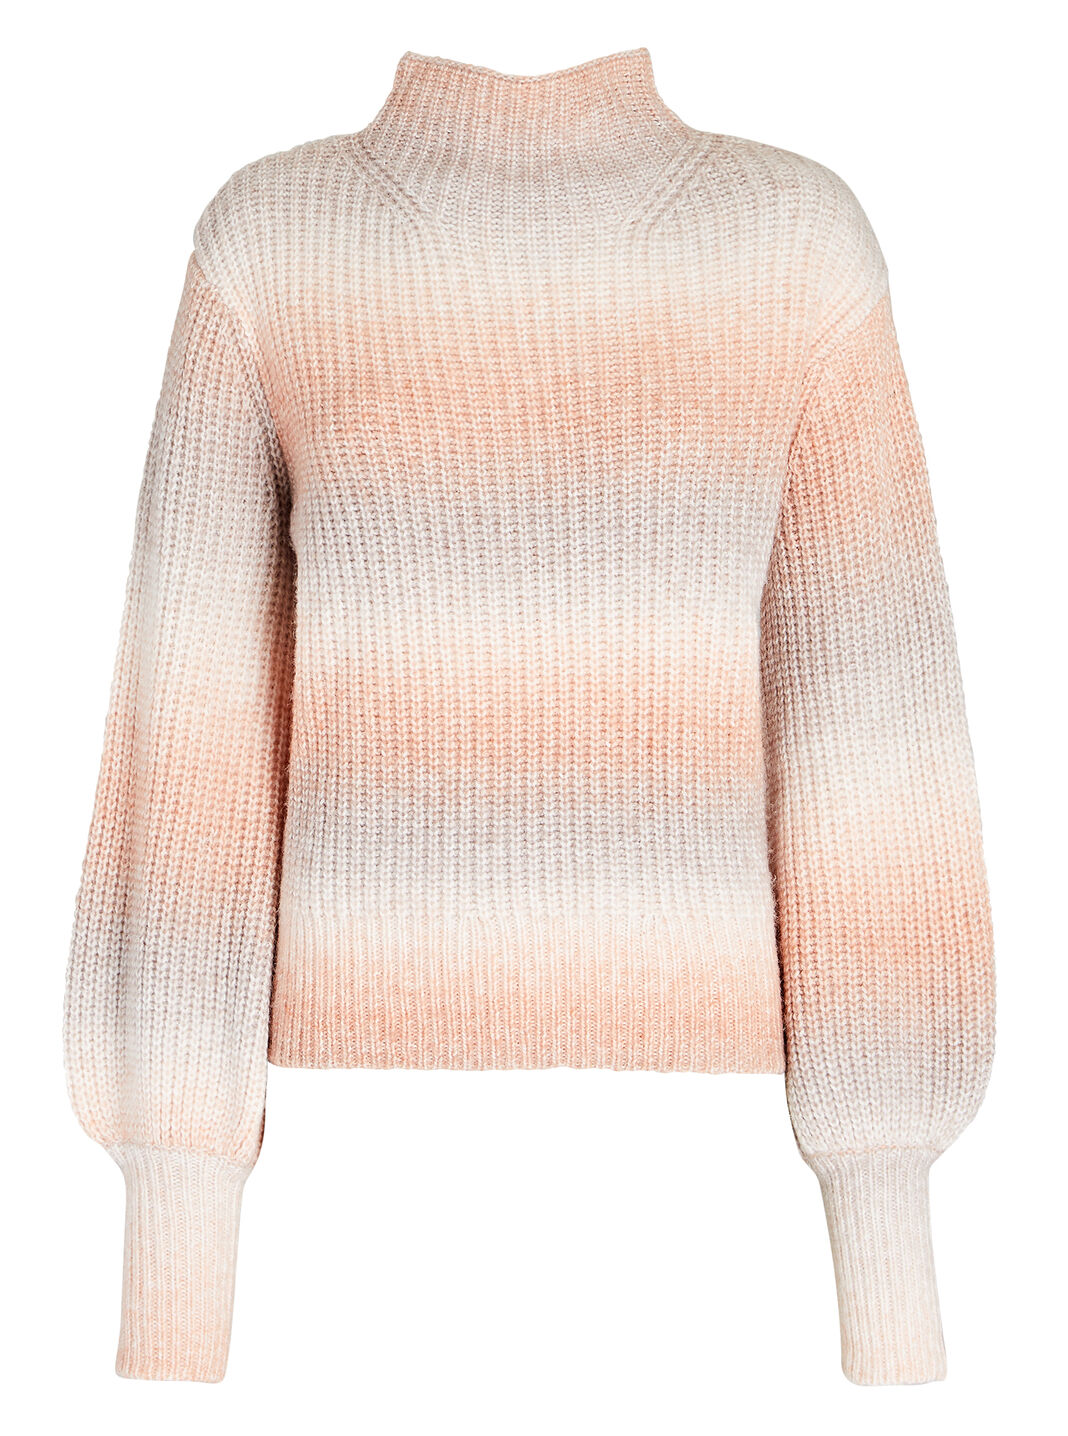 Sylvie Puff Sleeve Ombr&eacute; Knit Sweater